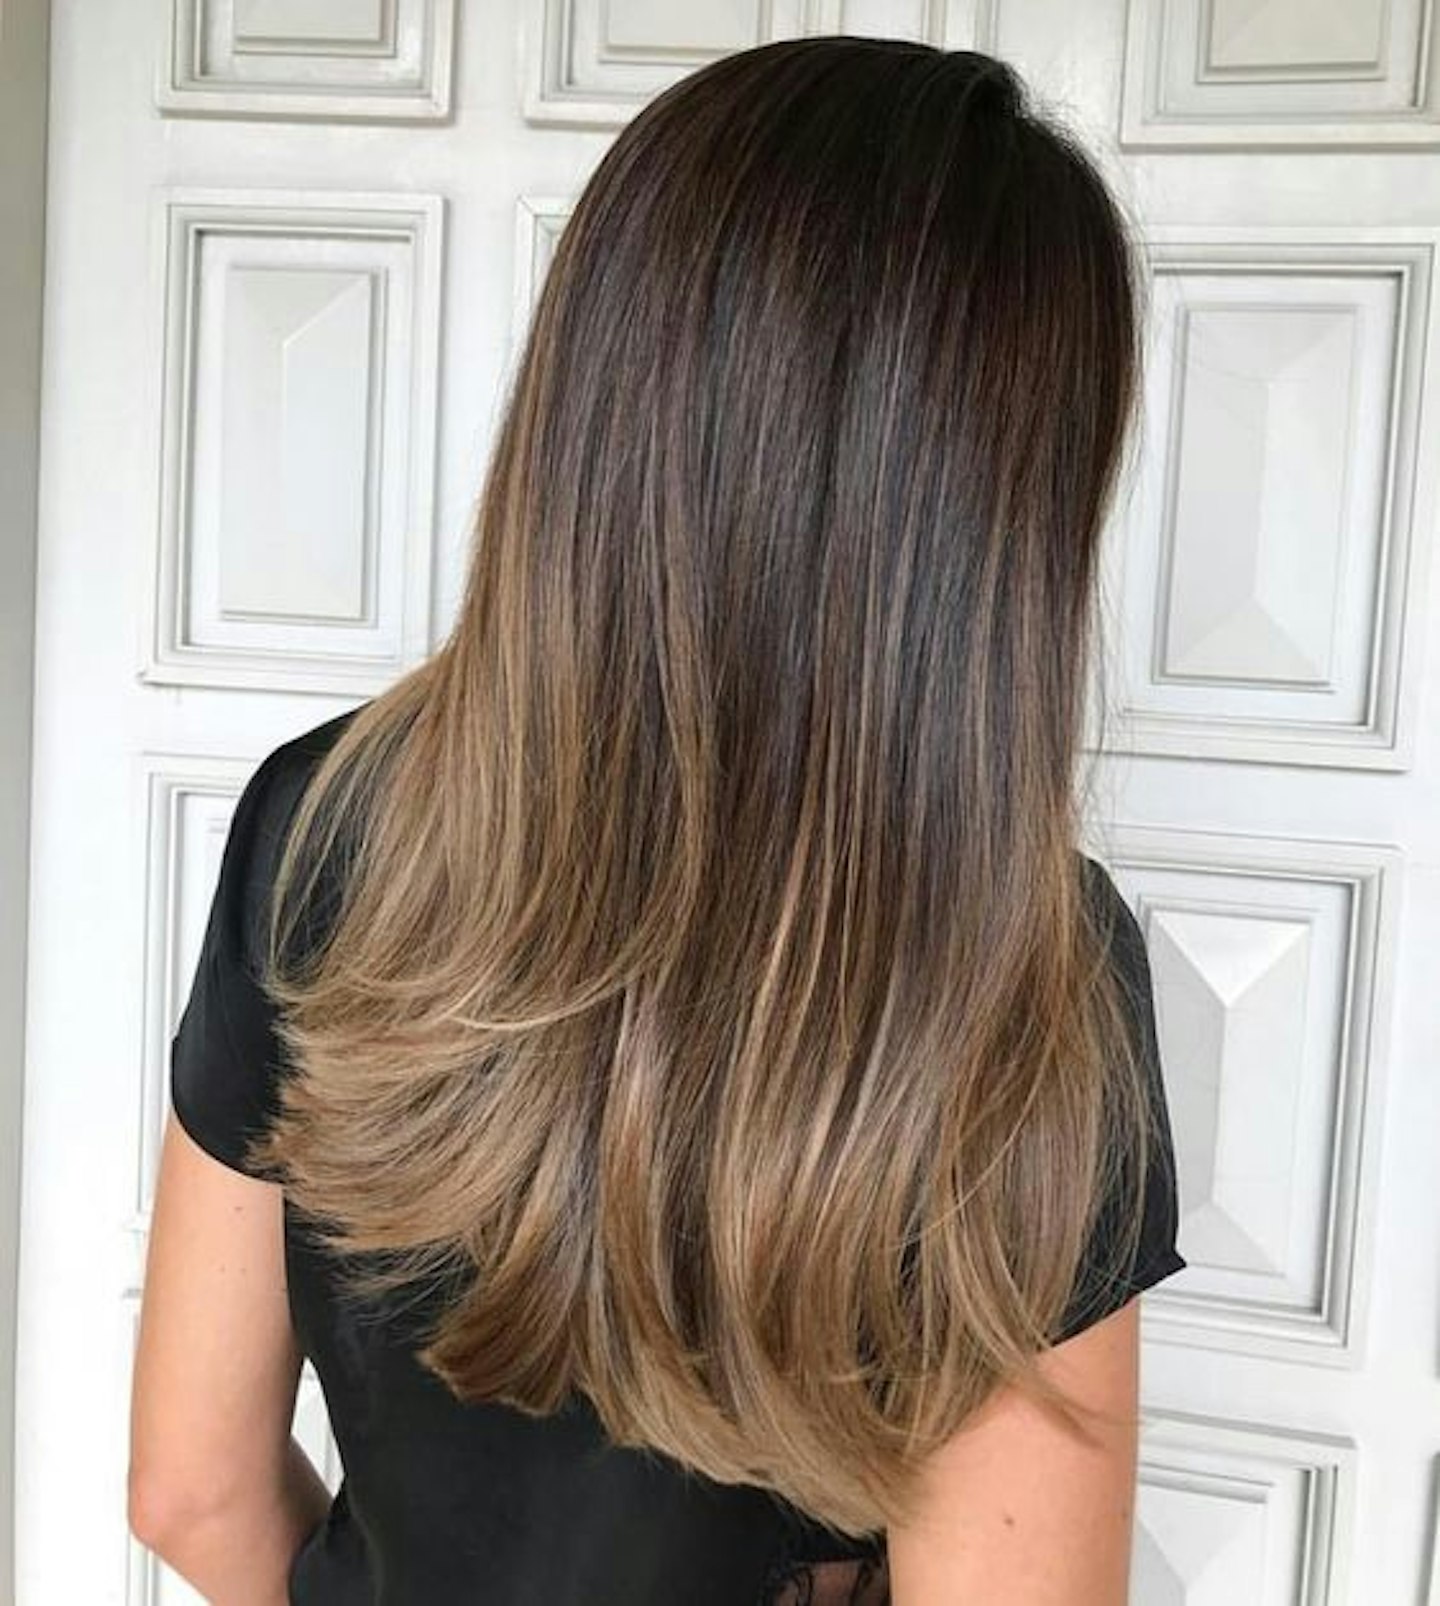 There's no need to go for all out blonde, a subtle hint of lightness like this works wonders.